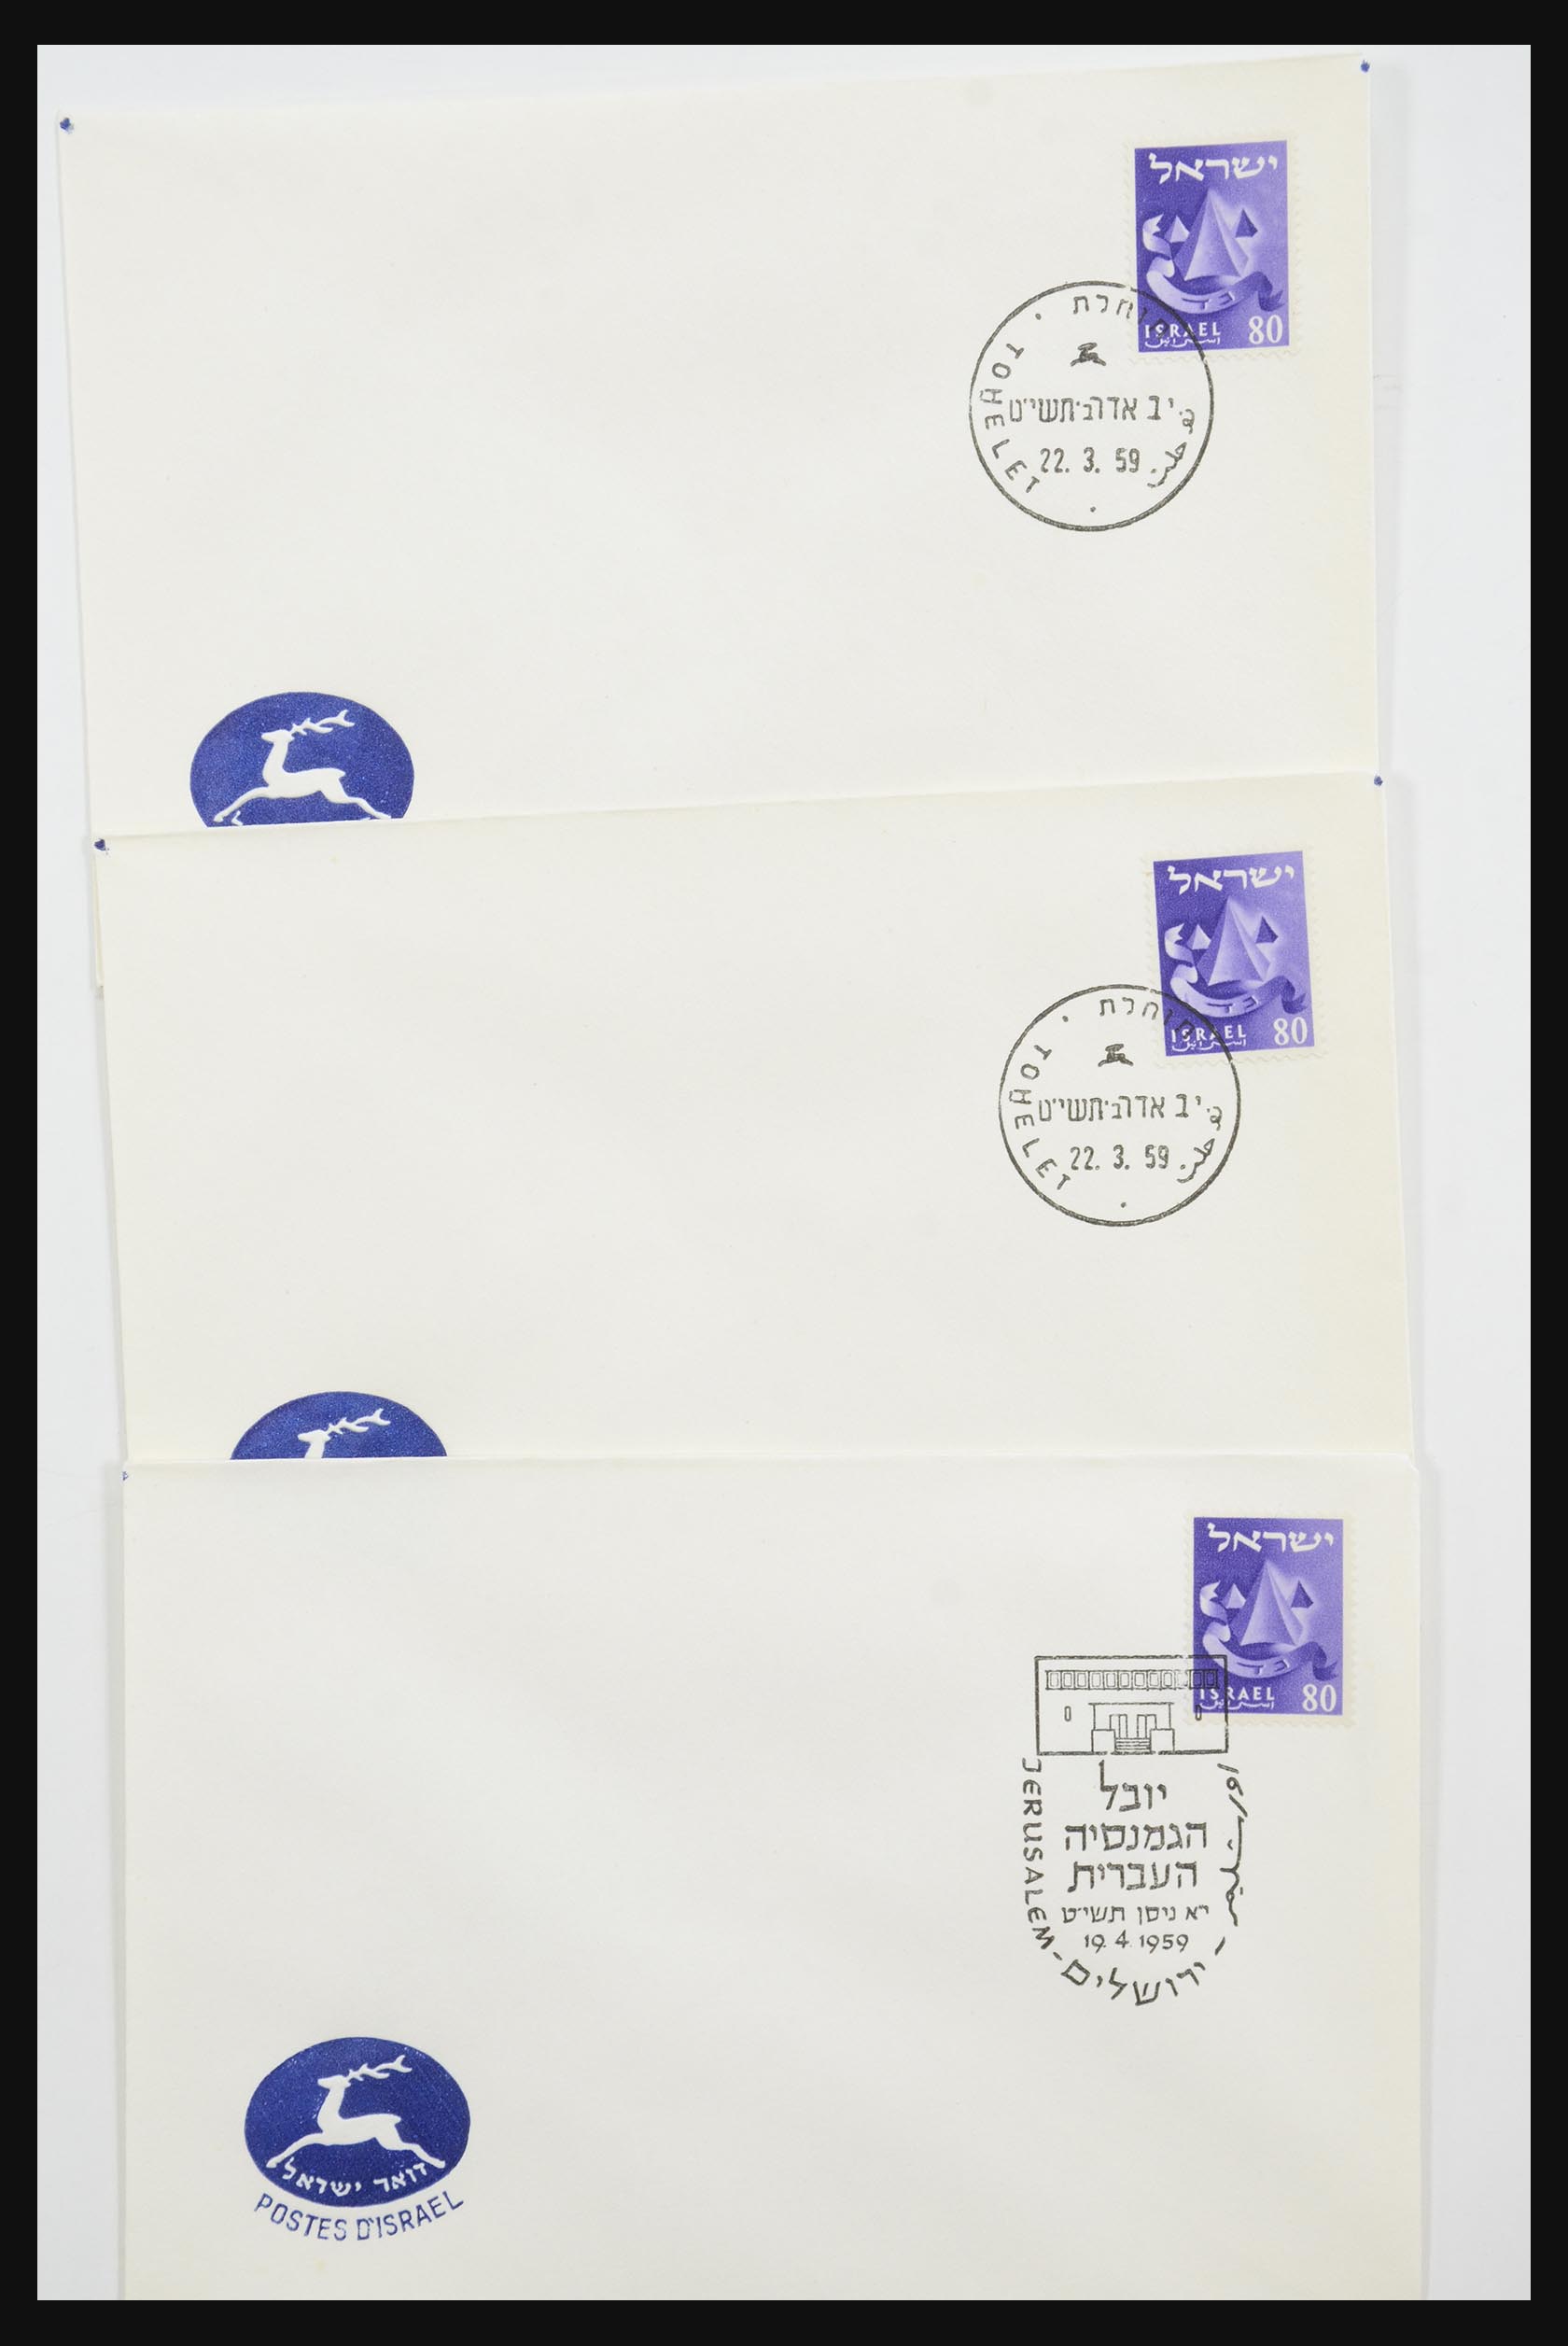 31924 020 - 31924 Israel first day cover collection 1957-2003.